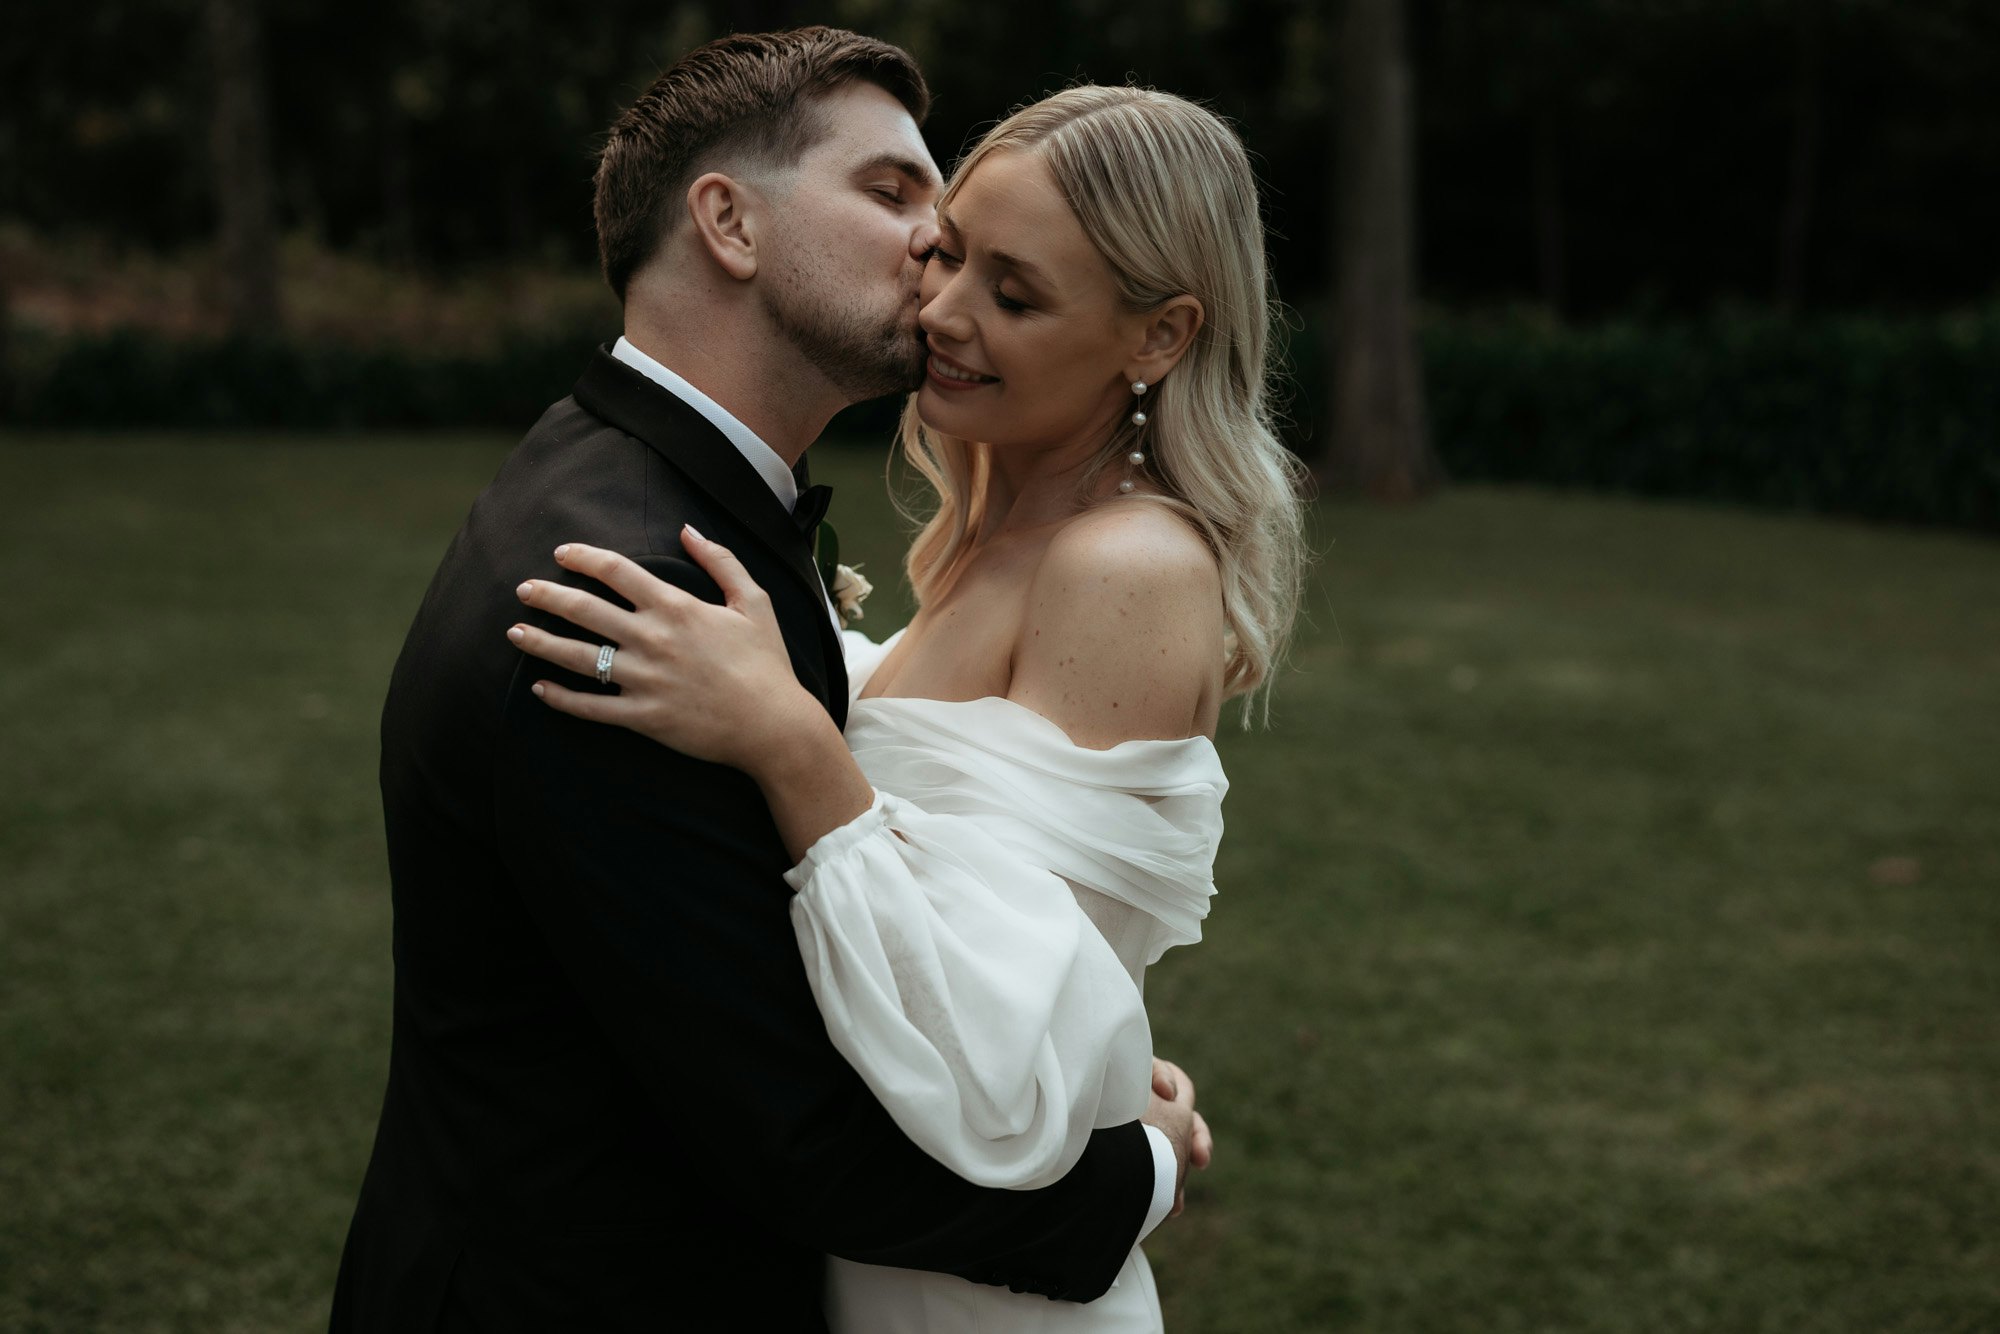 couple embrace and kiss on their wedding day